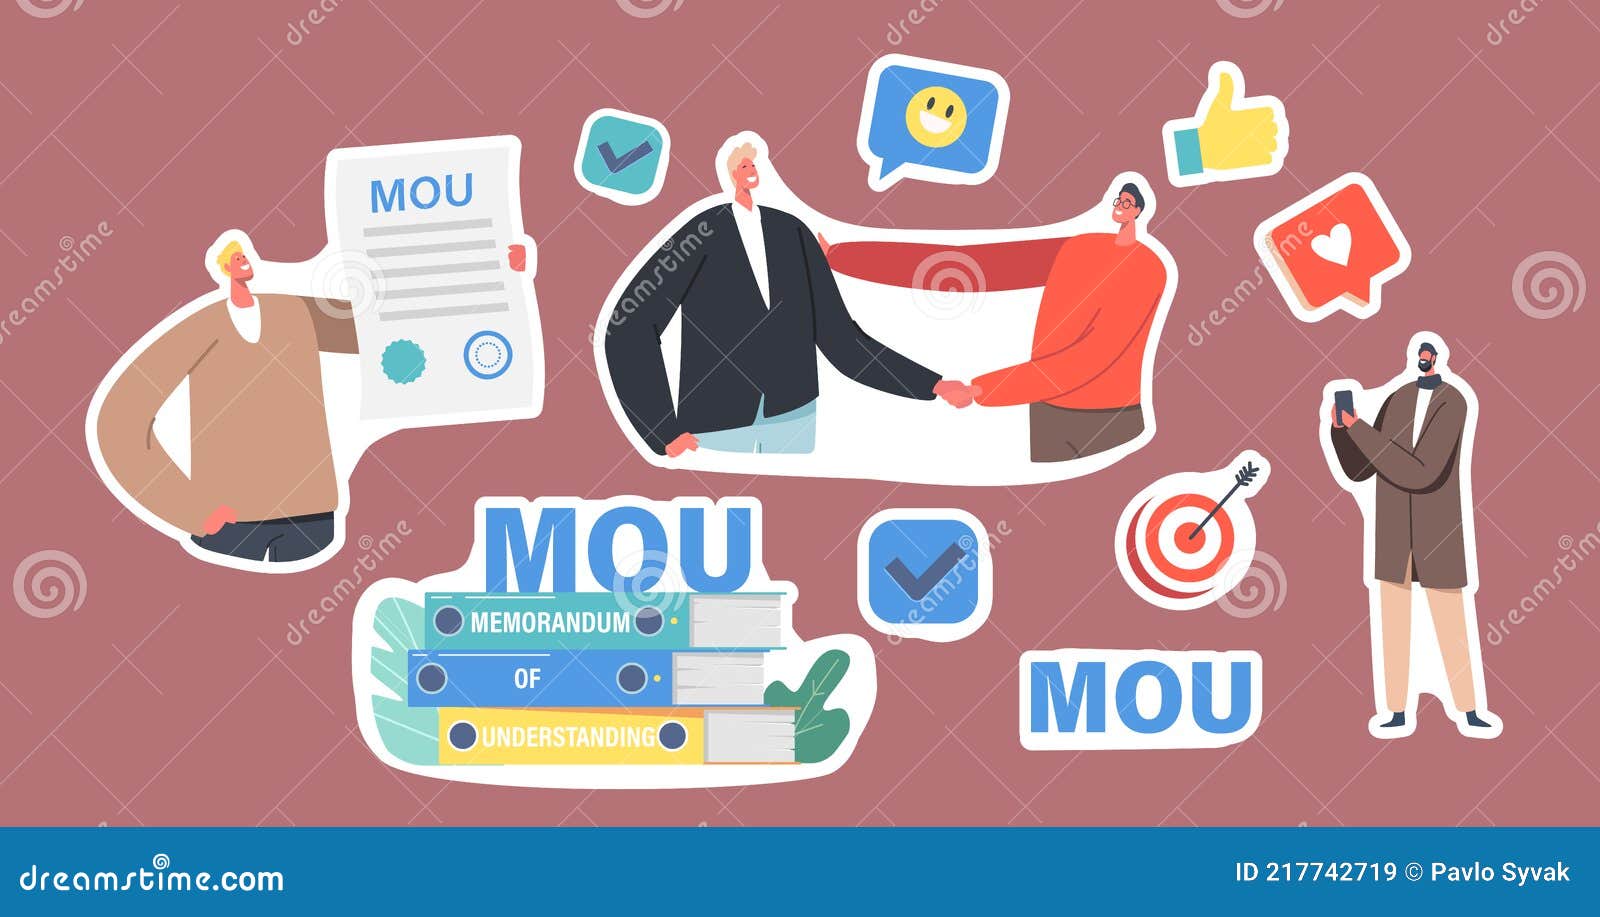 set of stickers businesspeople characters with mou documents, pile of memorandum of understanding documentation